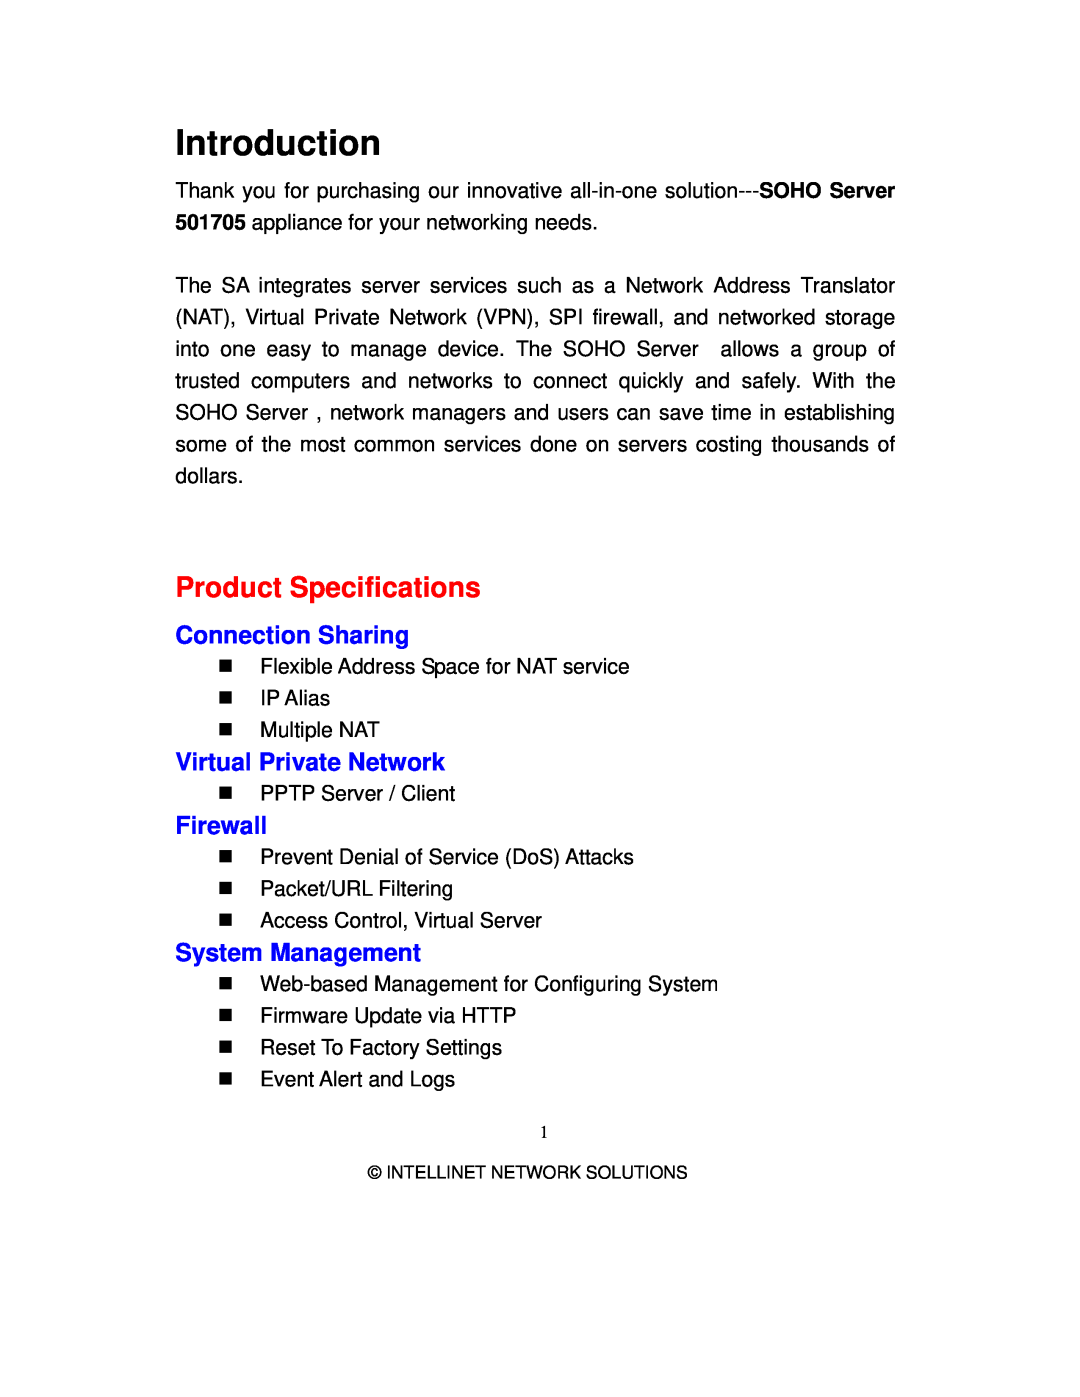 Intellinet Network Solutions 501705 manual Introduction, Product Specifications, Connection Sharing, Firewall 